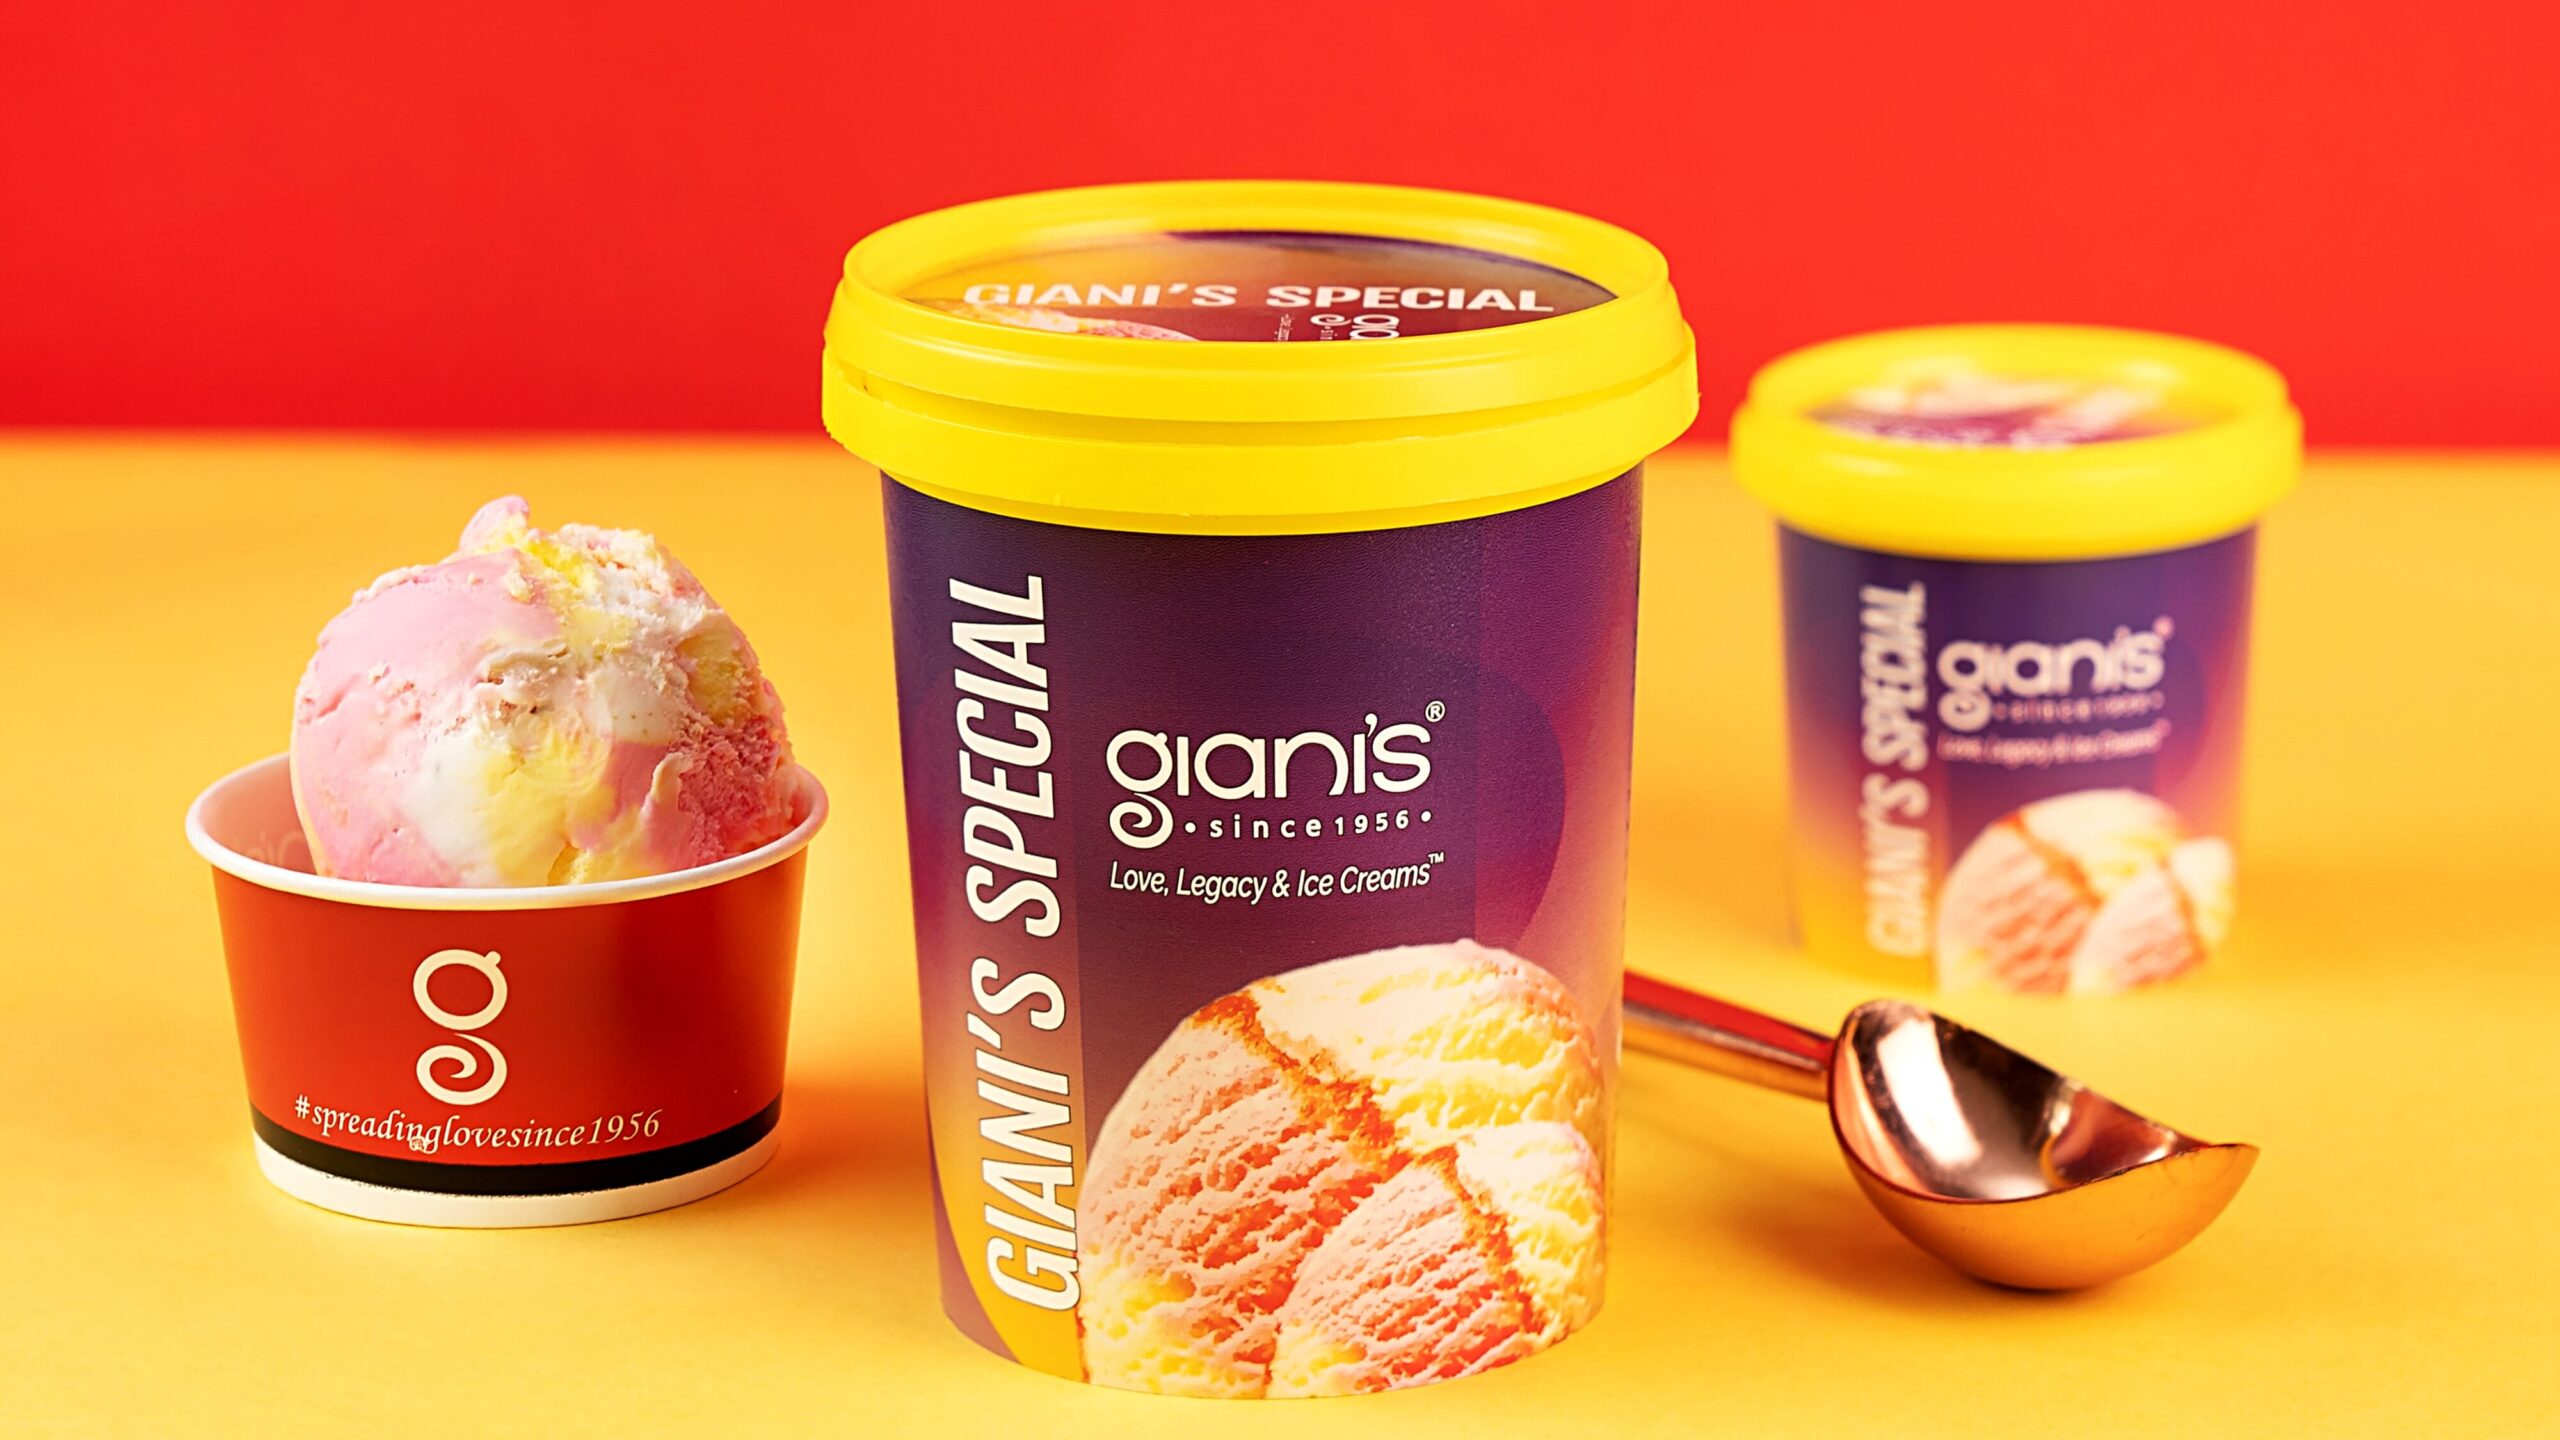 Giani’s Special Ice Cream is the perfect equivalent for the finest fruit cream dessert